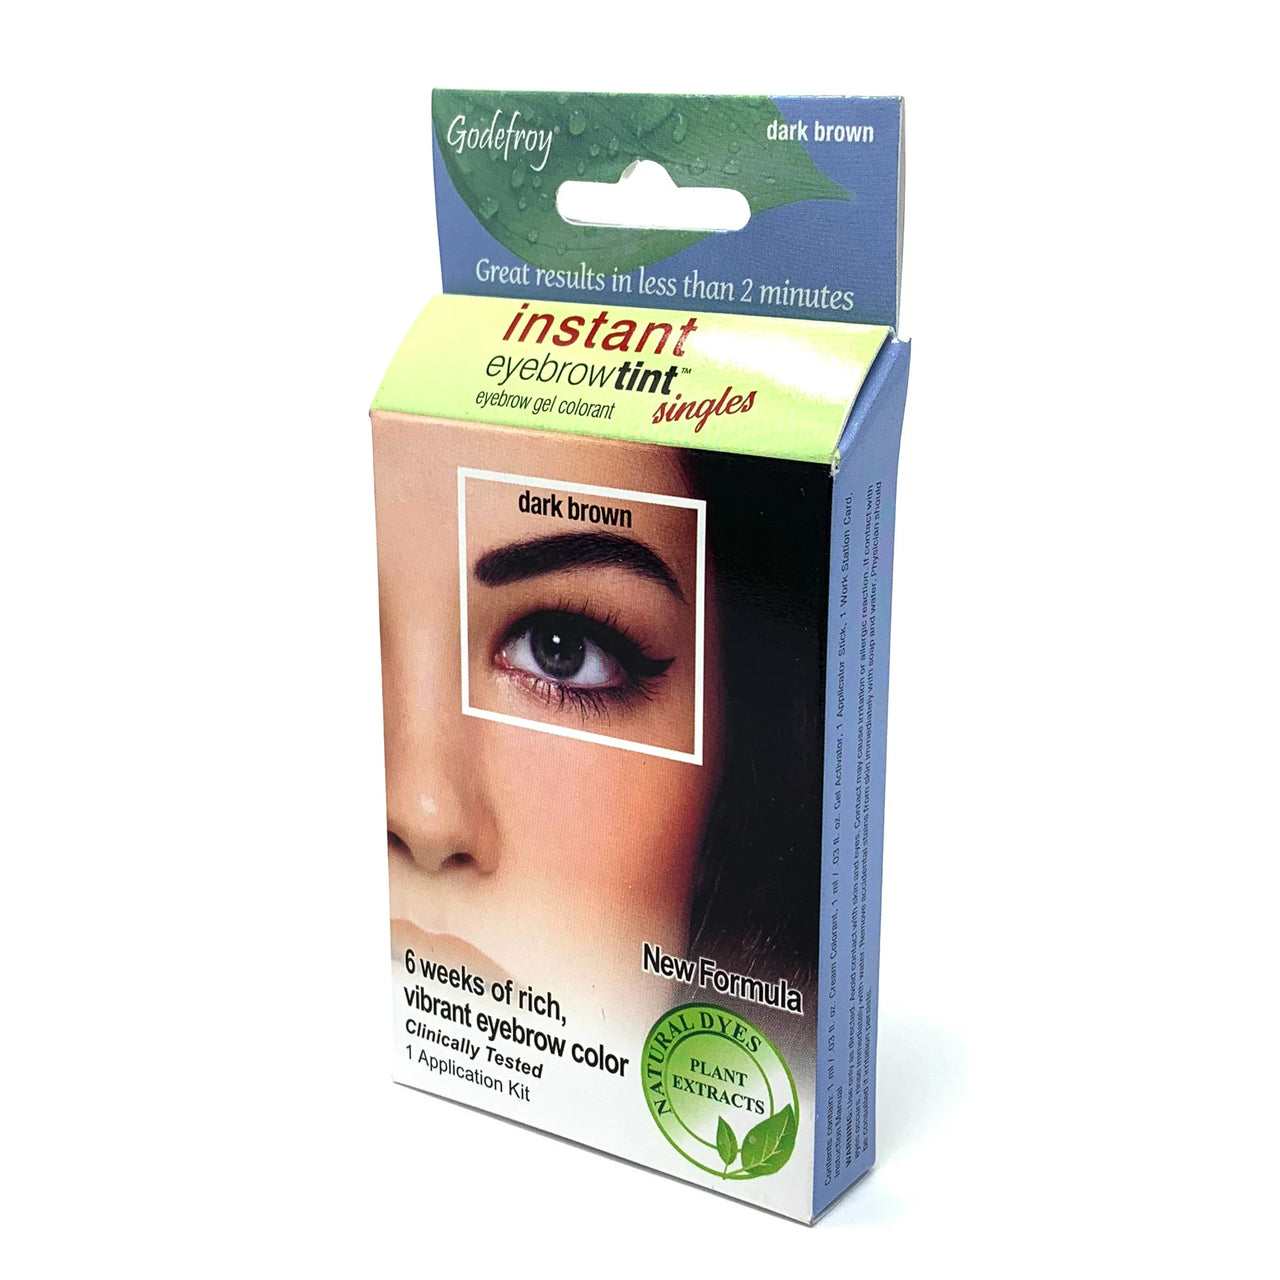 Godefroy Instant Eyebrow Tint 6 Weeks of Rich Vibrant Color - Dark Brown